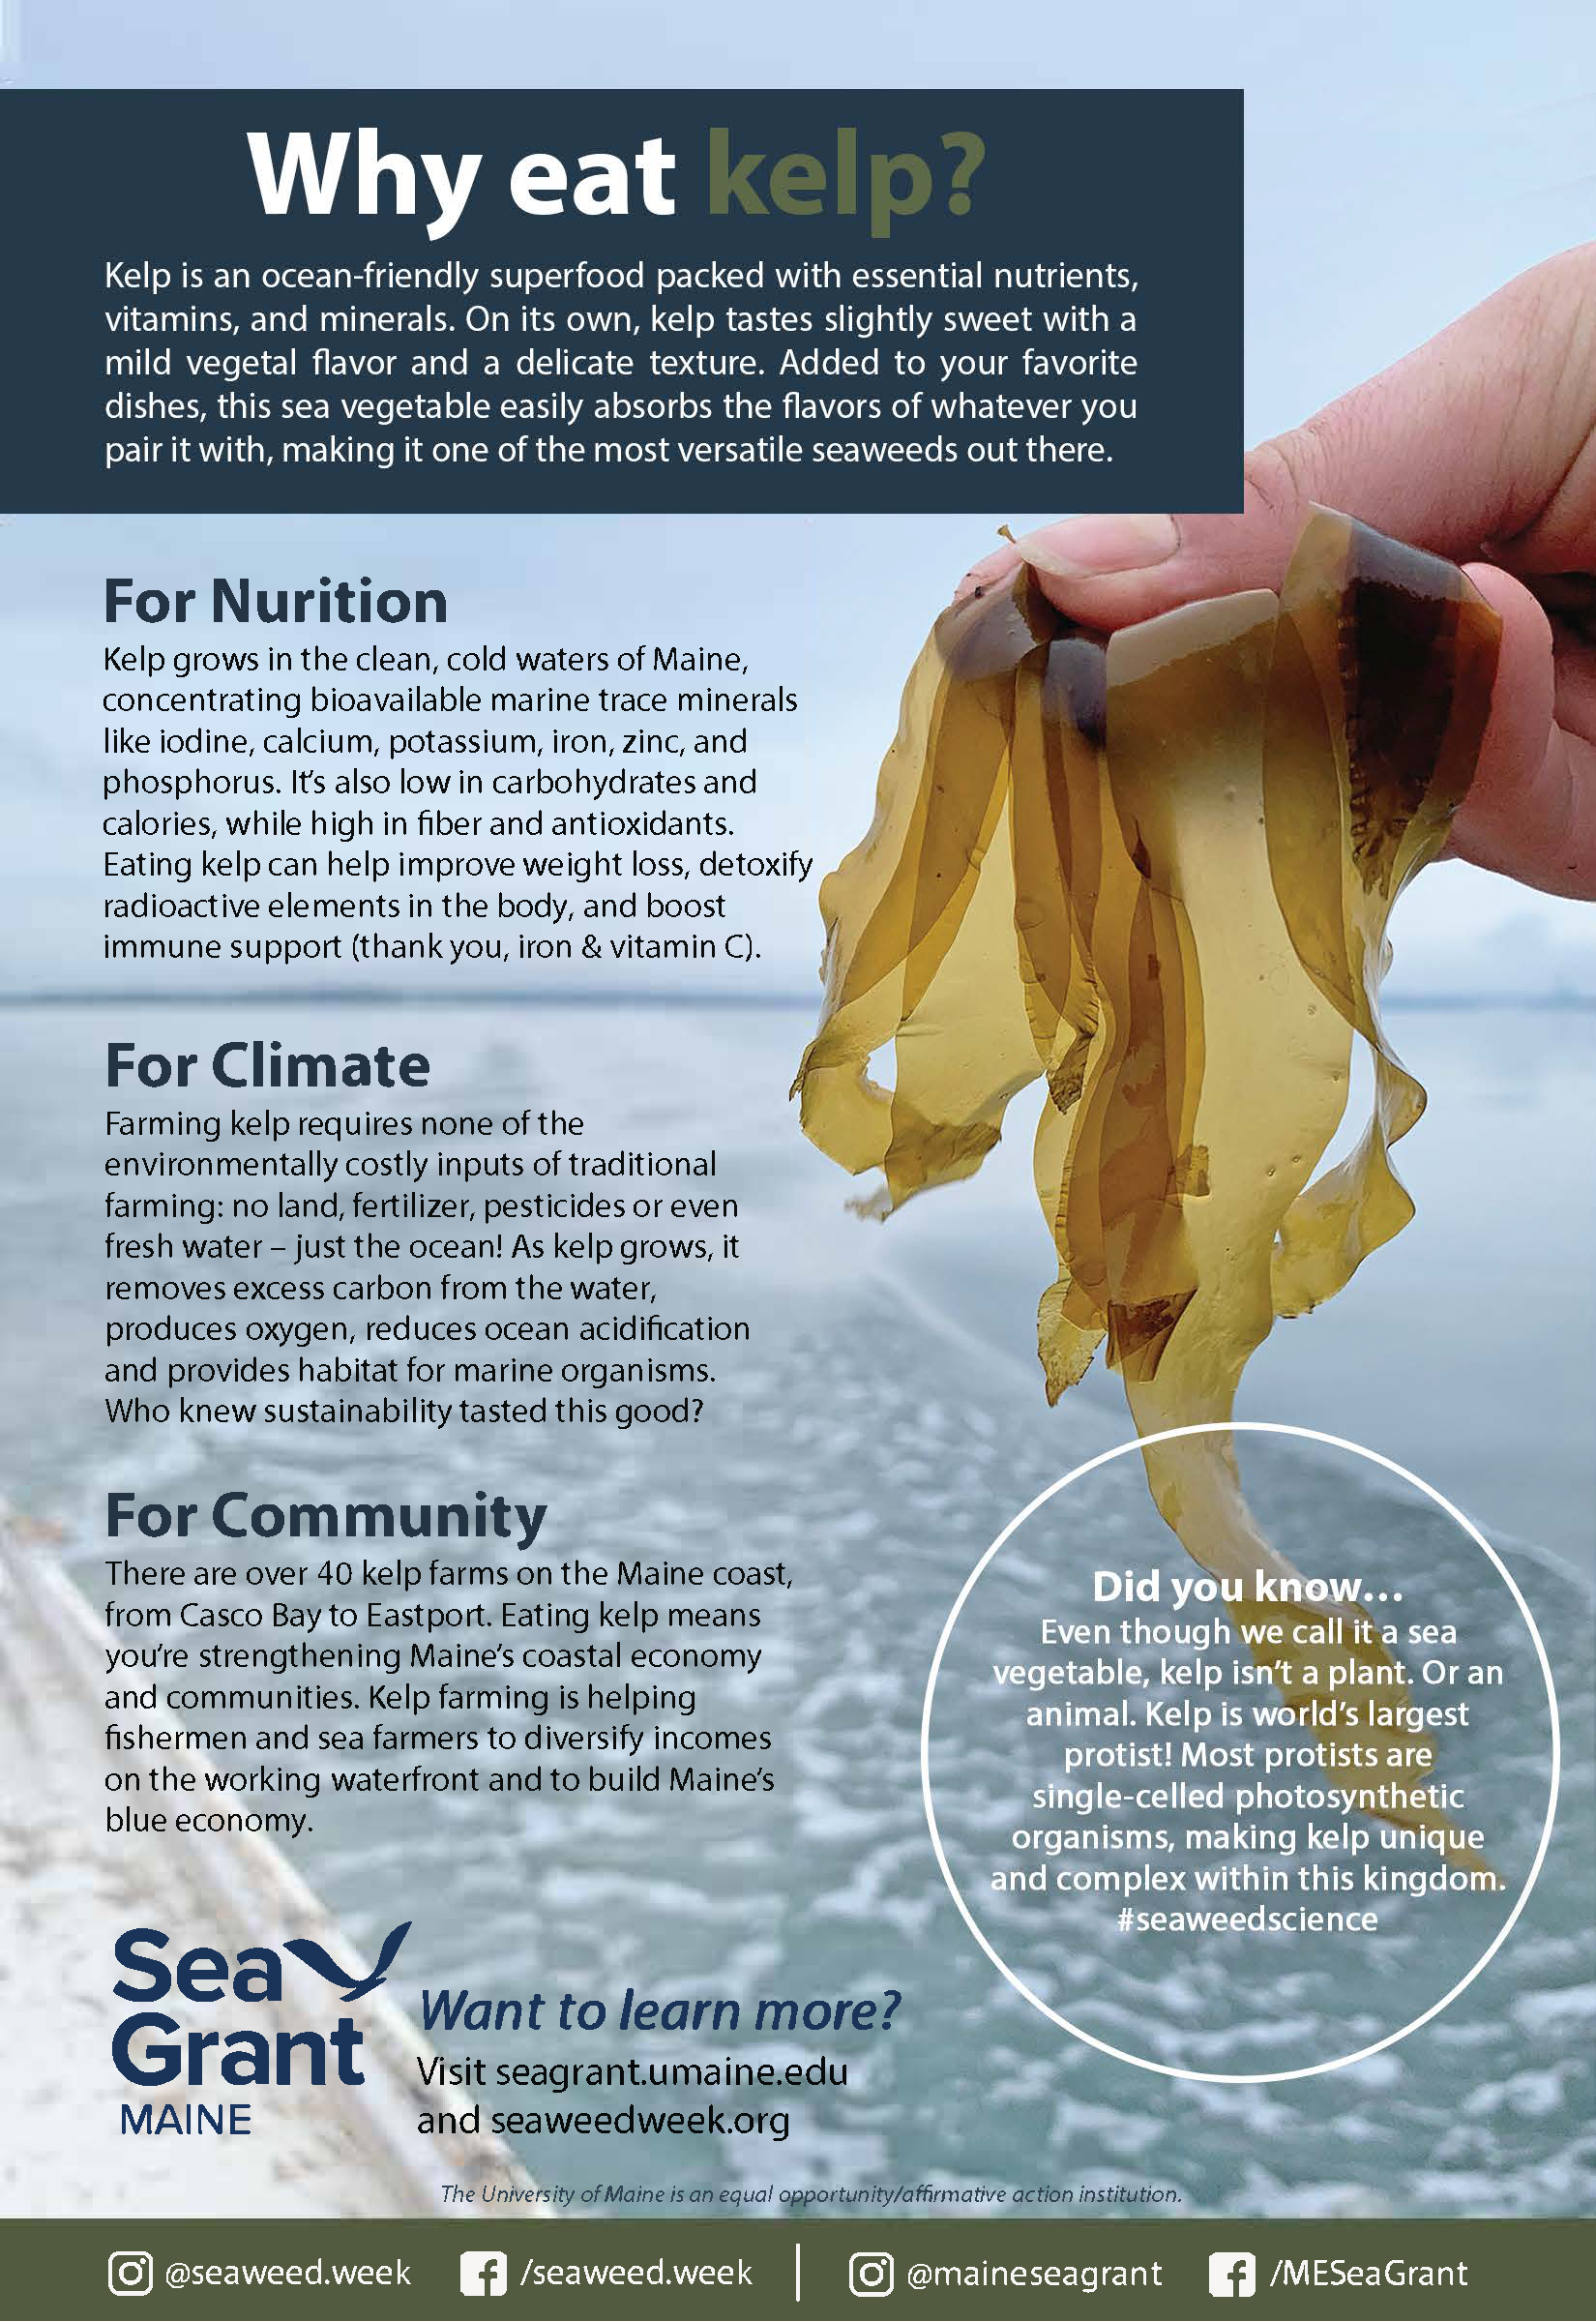 A photo of a hand holding a piece of kelp in front of the ocean, with text on top that describes the nutritional, climate, and community benefits of kelp.